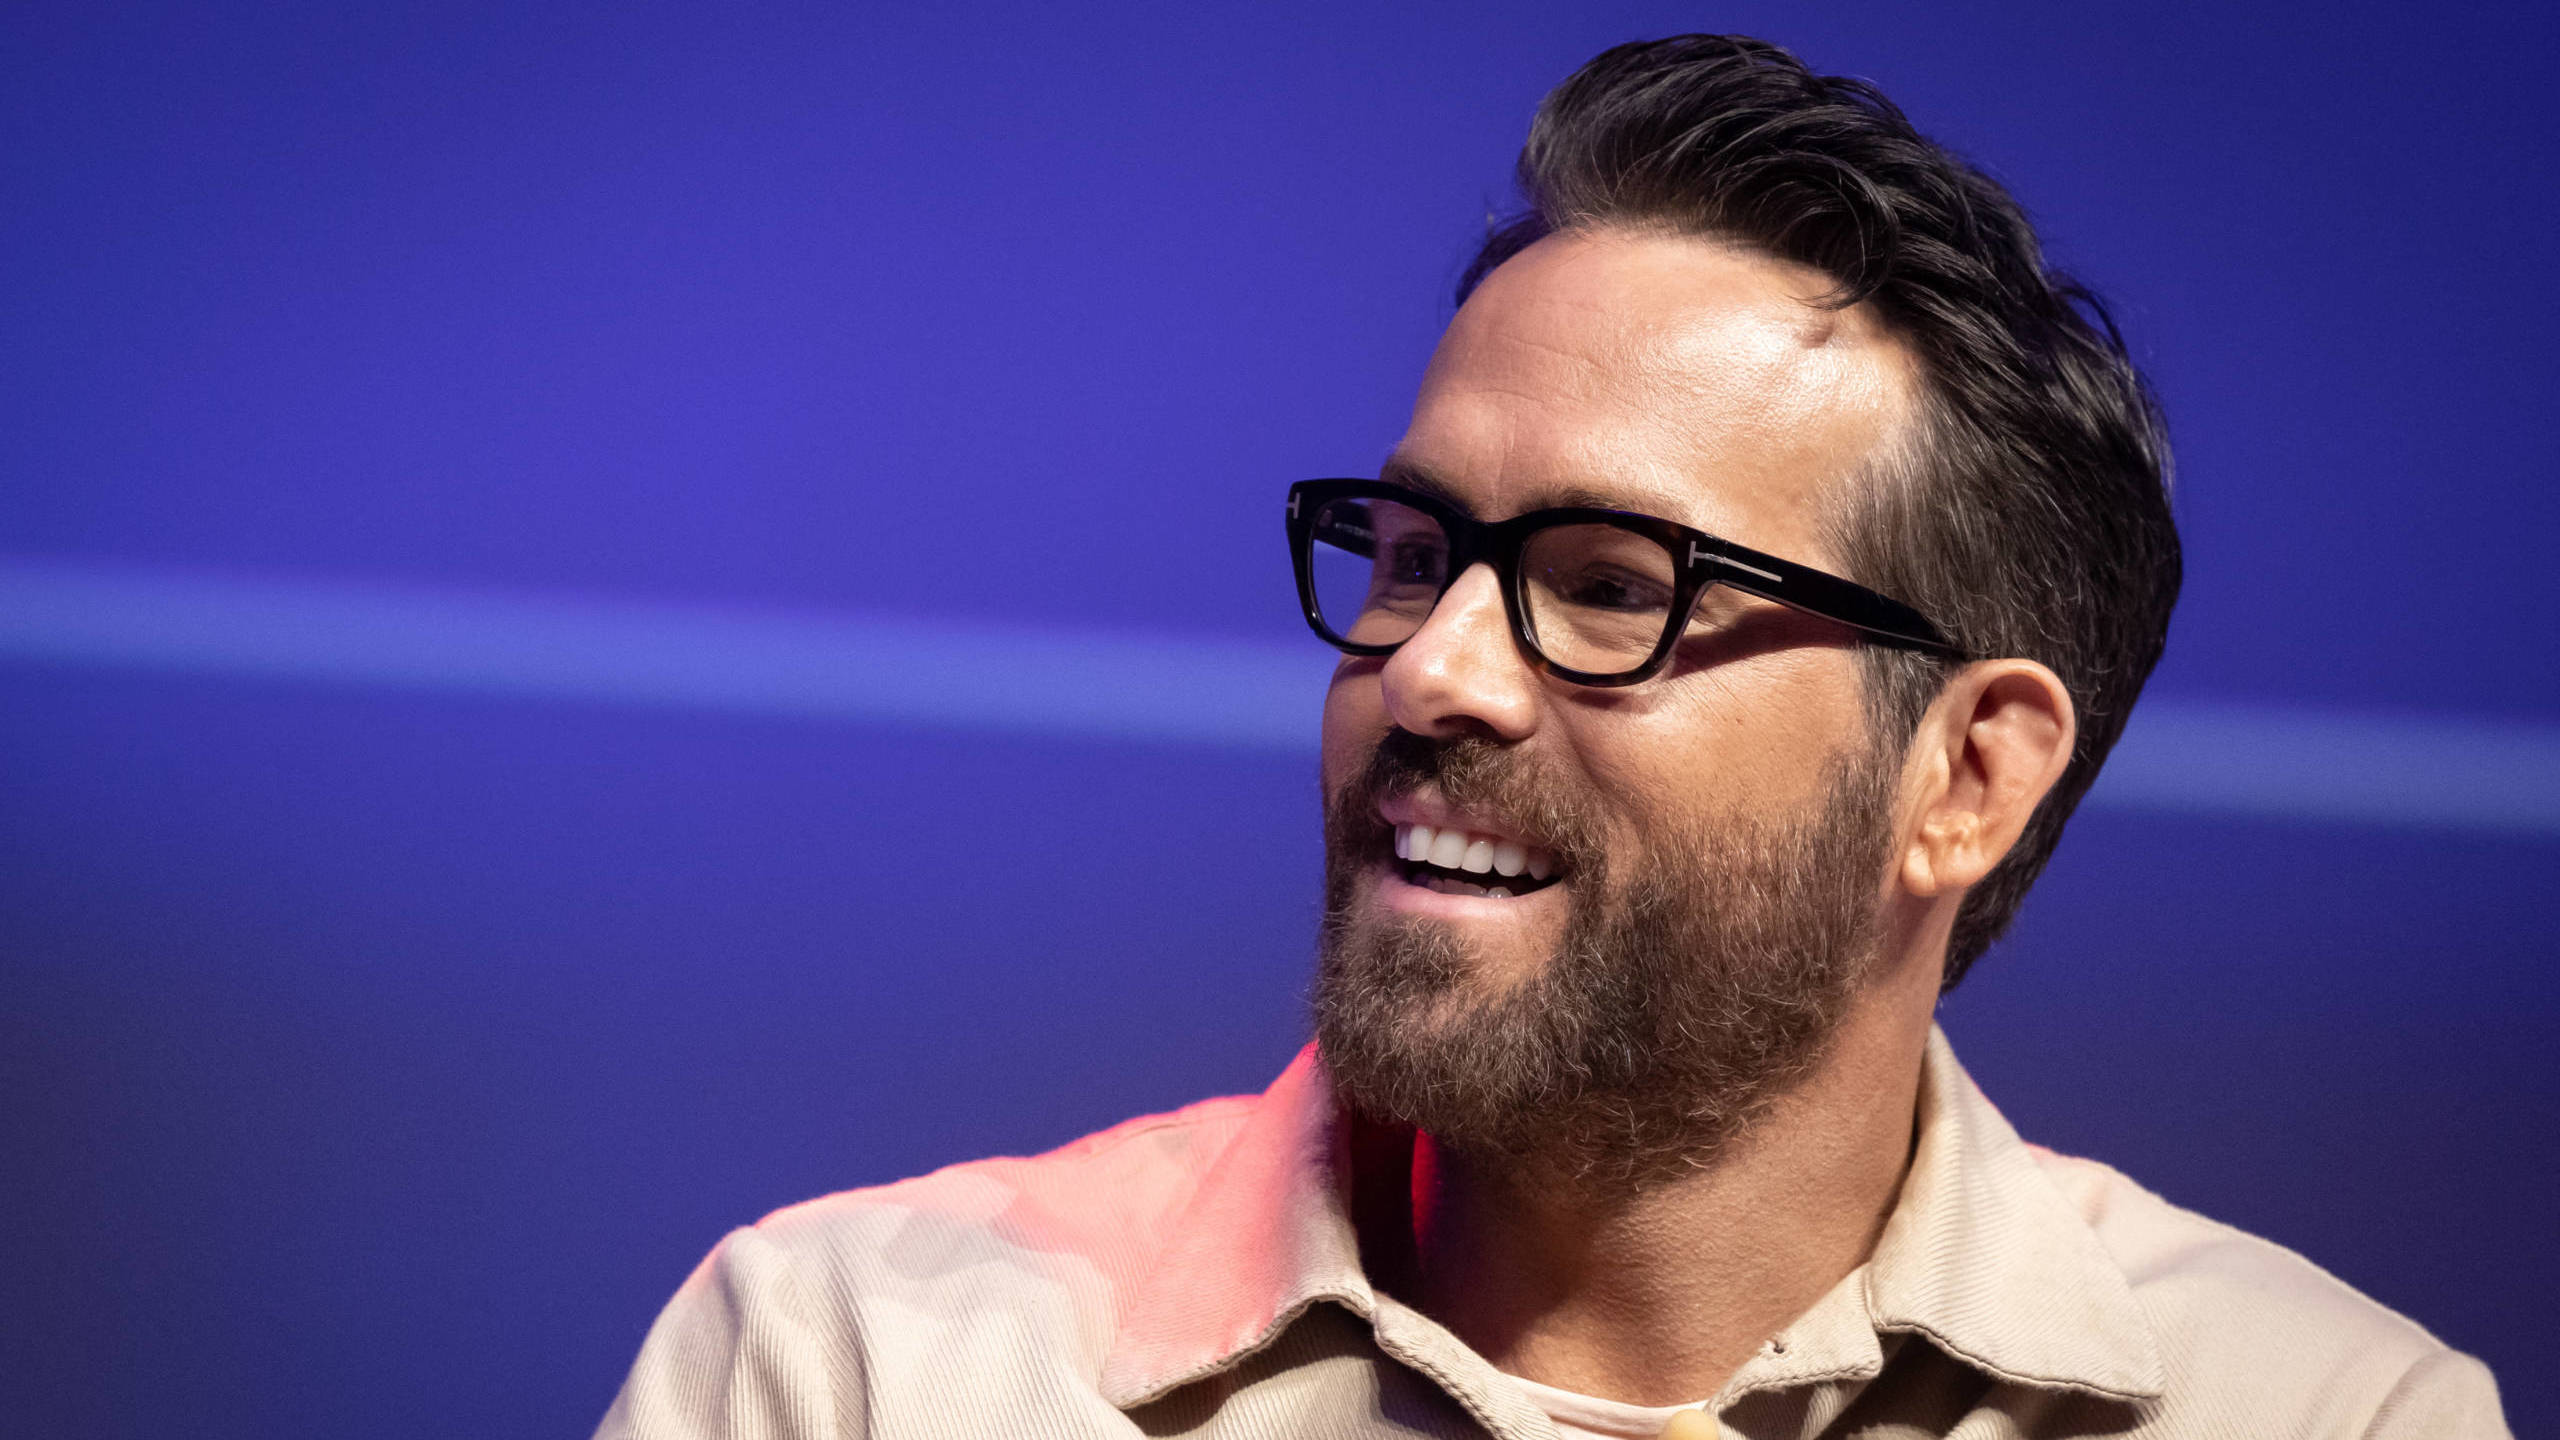 T-Mobile to Acquire Ryan Reynolds' Mint Mobile for Up to $1.35 Billion